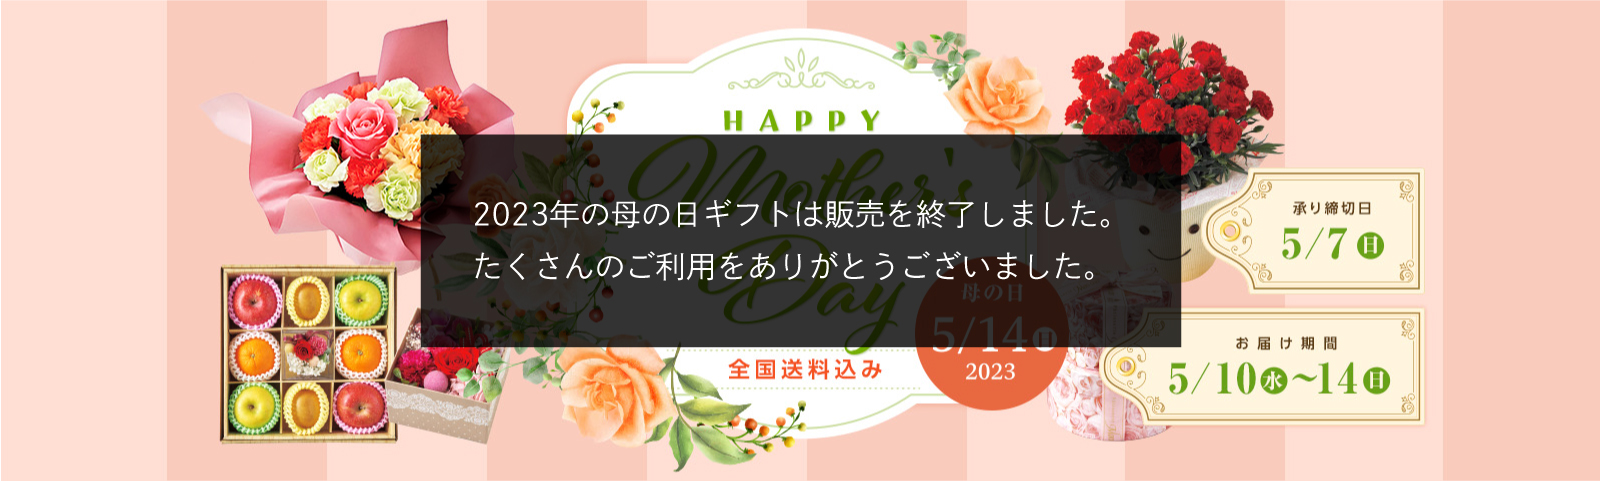 Happy Mother's Day 母の日 全国送料込み 承り締切日 5/7(日) お届け期間 5/10日(水)～14(日)